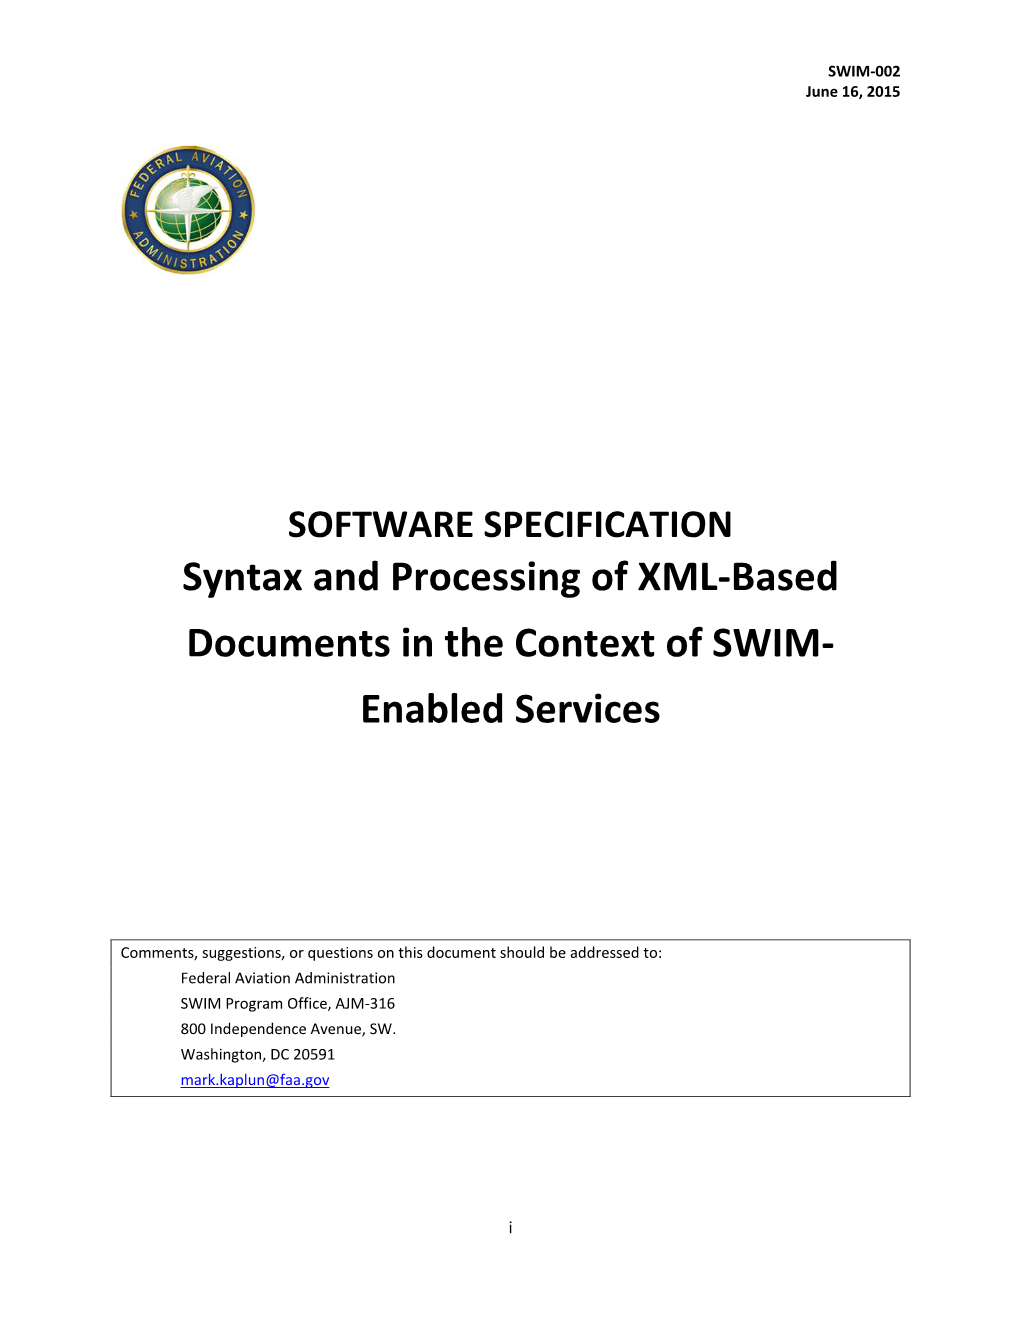 SWIM-002, Syntax and Processing of XML-Based Documents in the Context of SWIM-Enabled Services